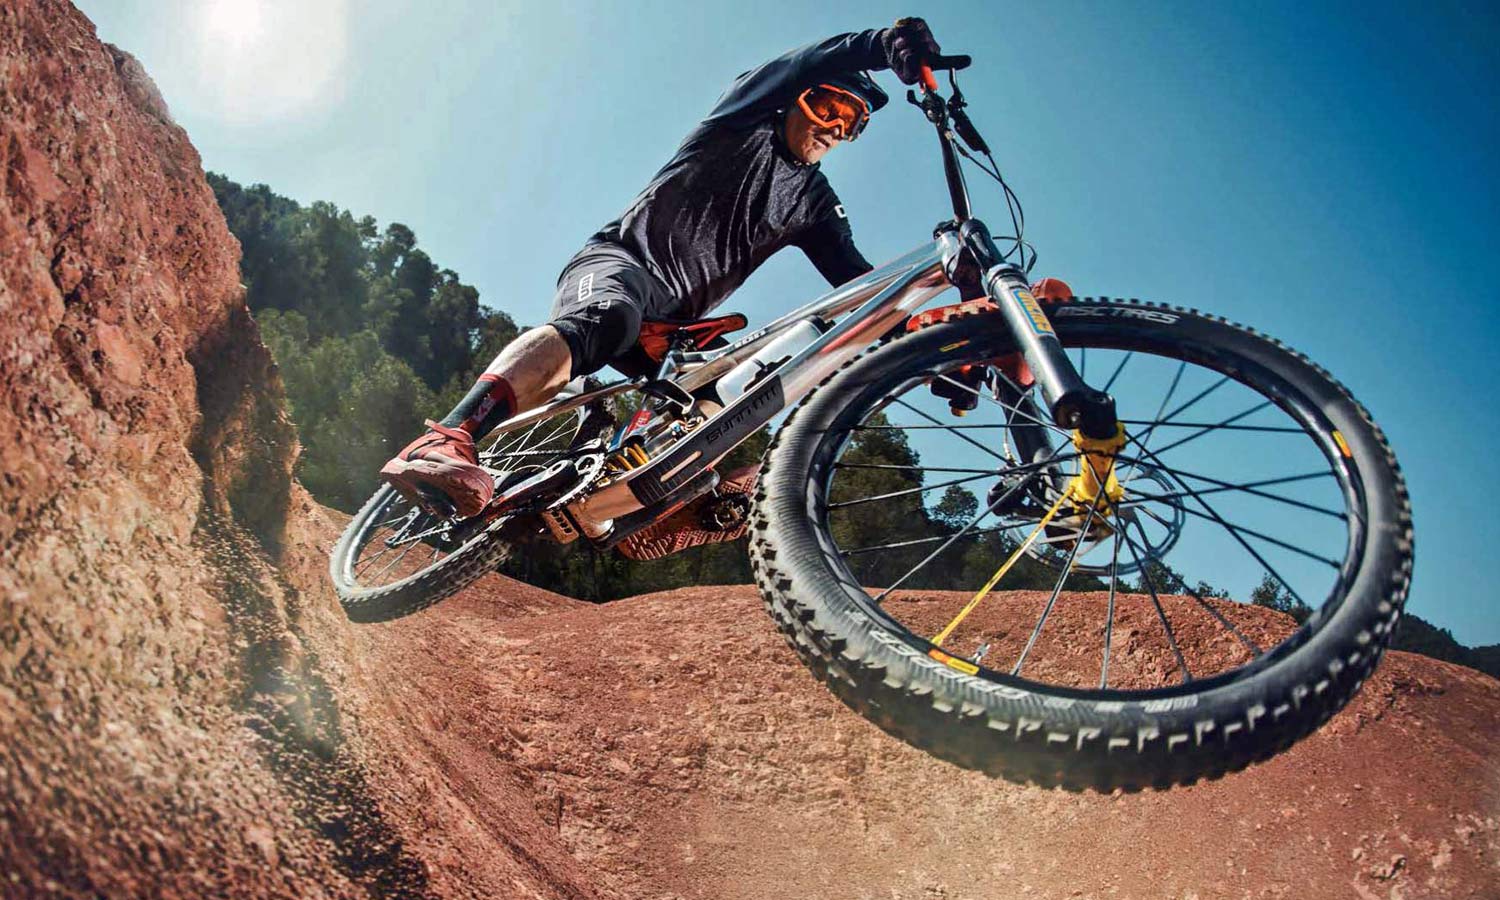 MSC Tires offers gripping, race-proven textured MTB treads, teases road & gravel